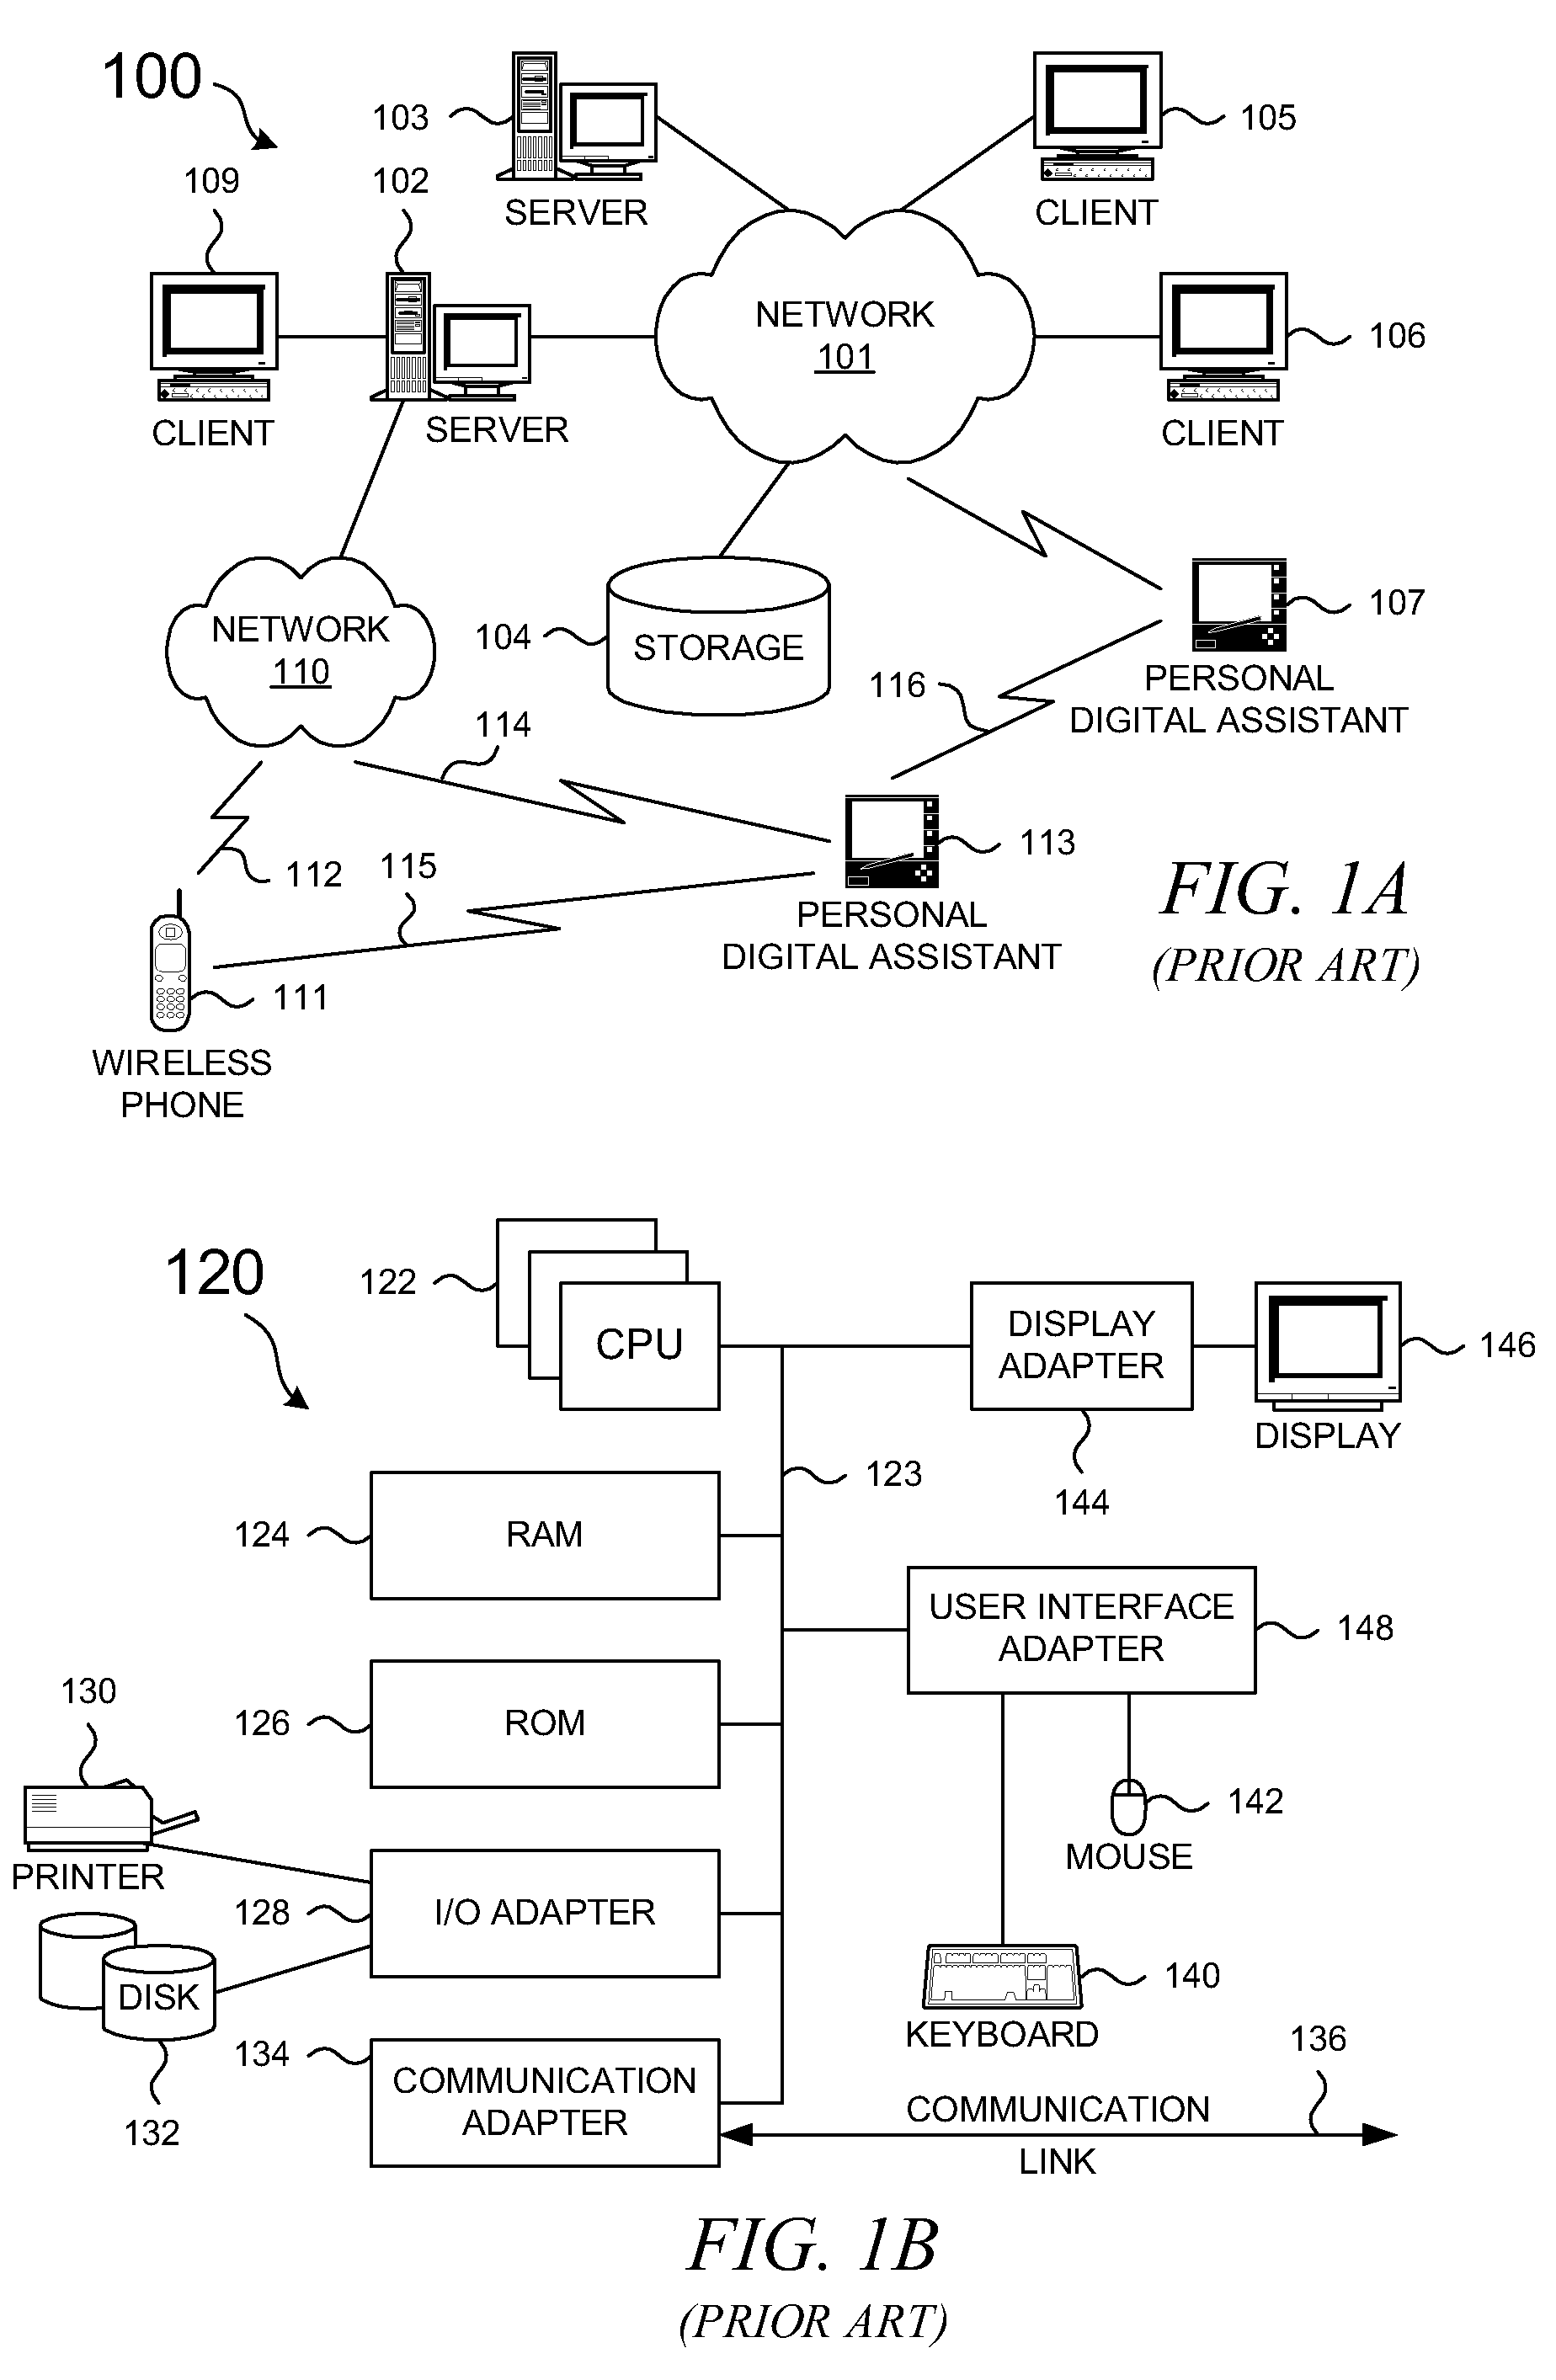 Method and system for implementing a floating identity provider model across data centers